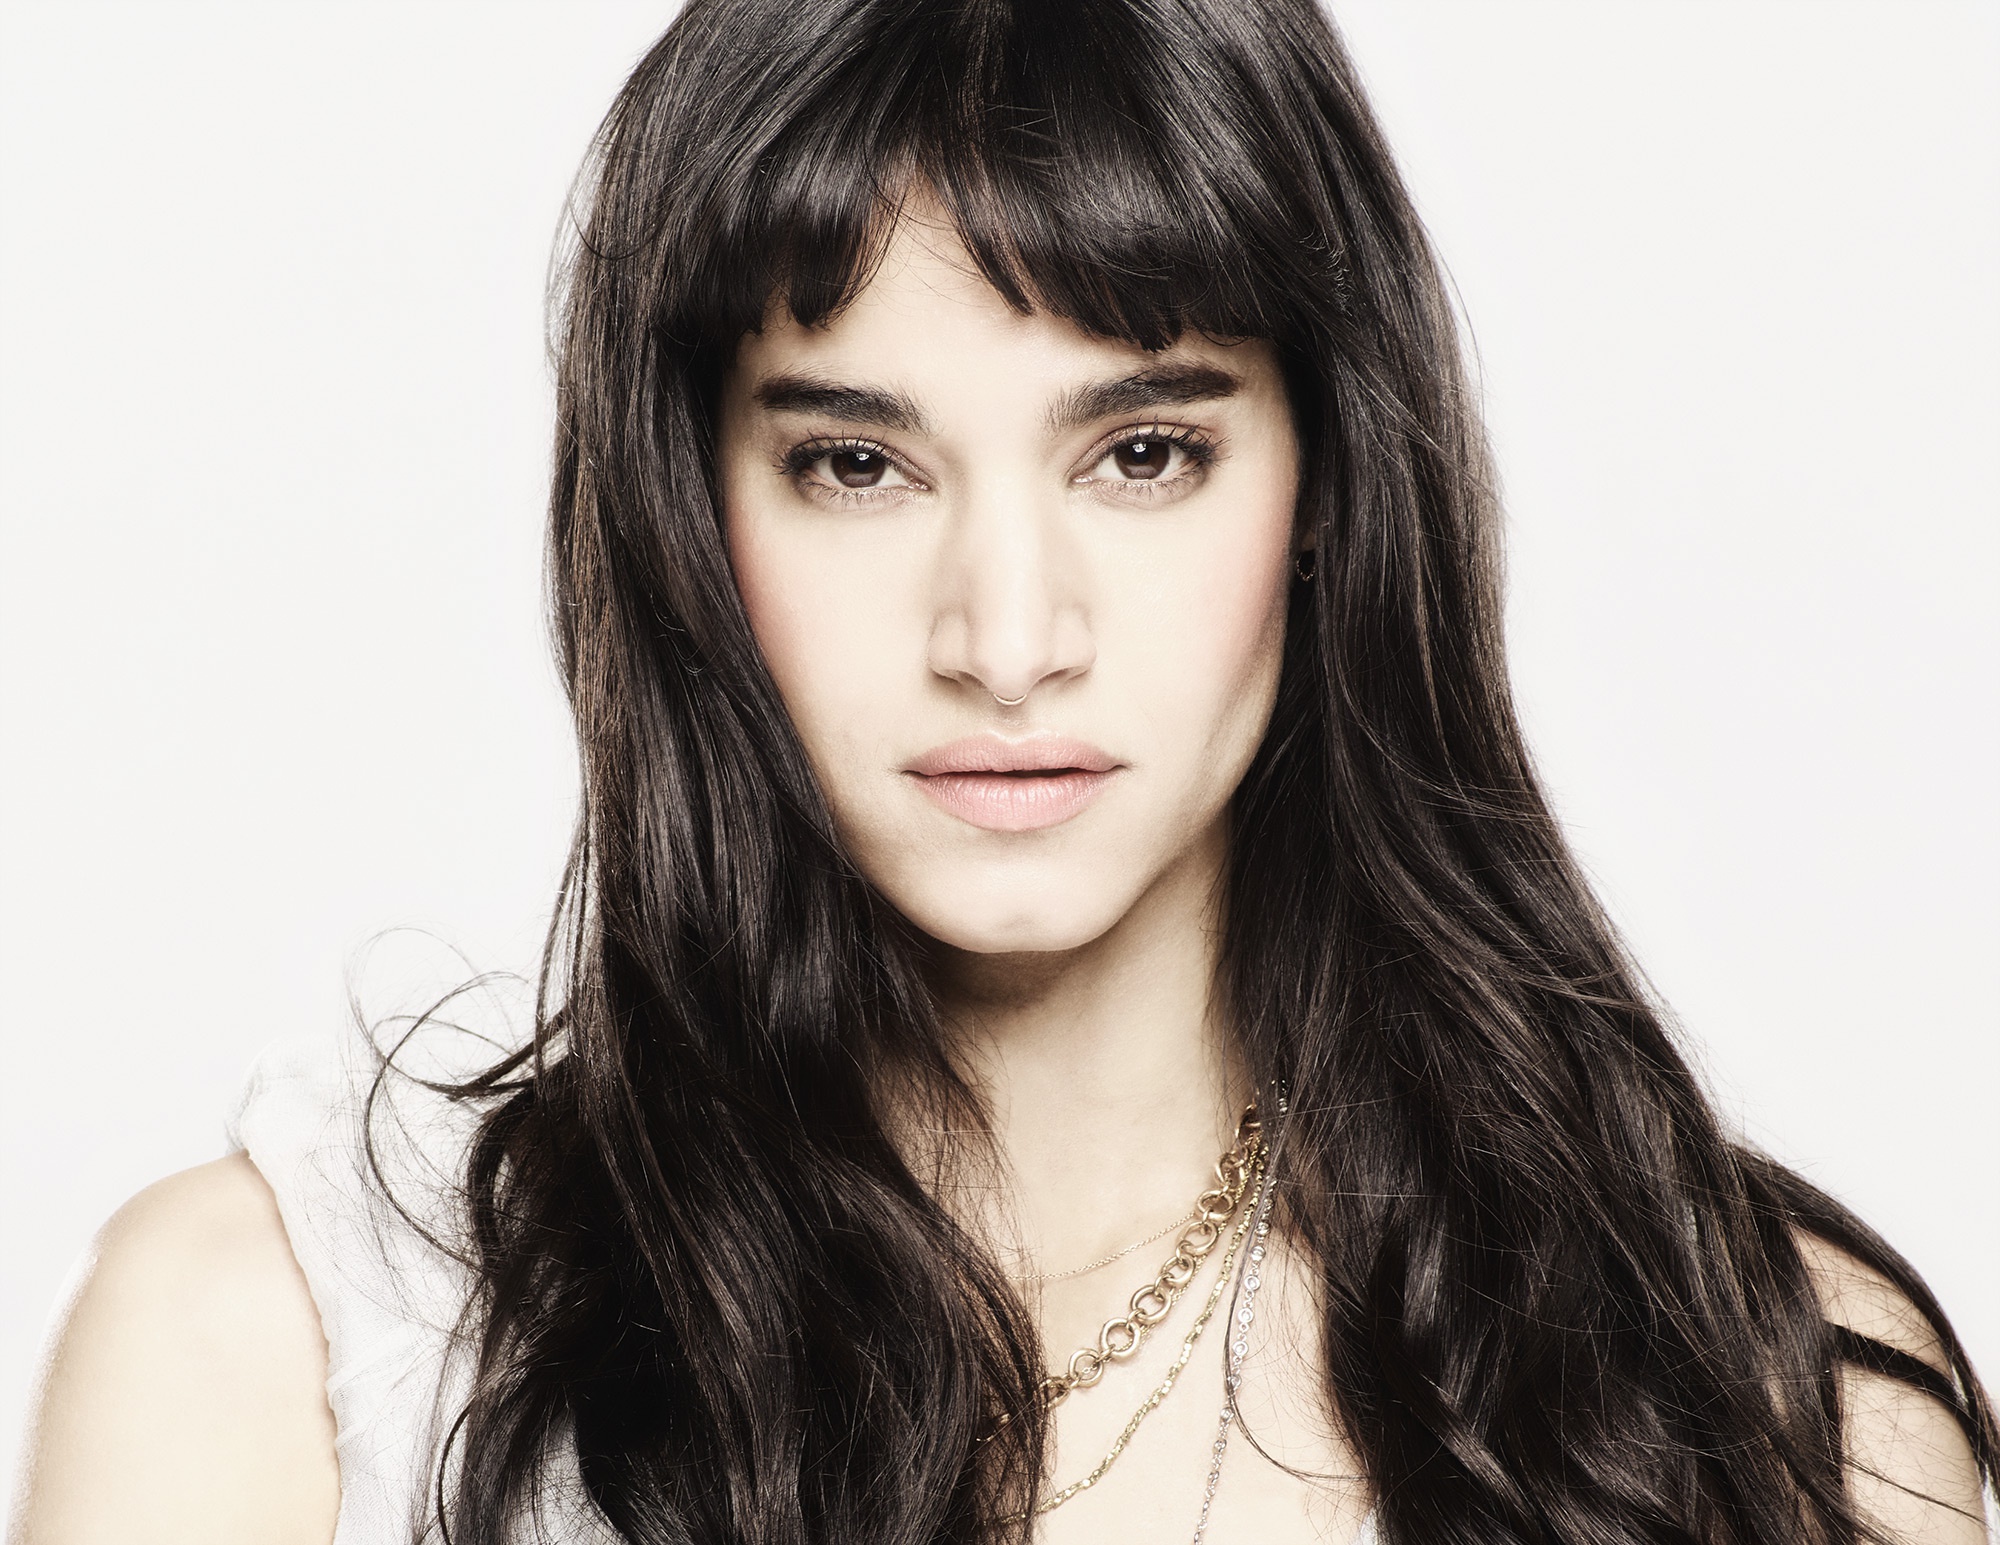 celebrity, sofia boutella, actress, black hair, brown eyes, face, french